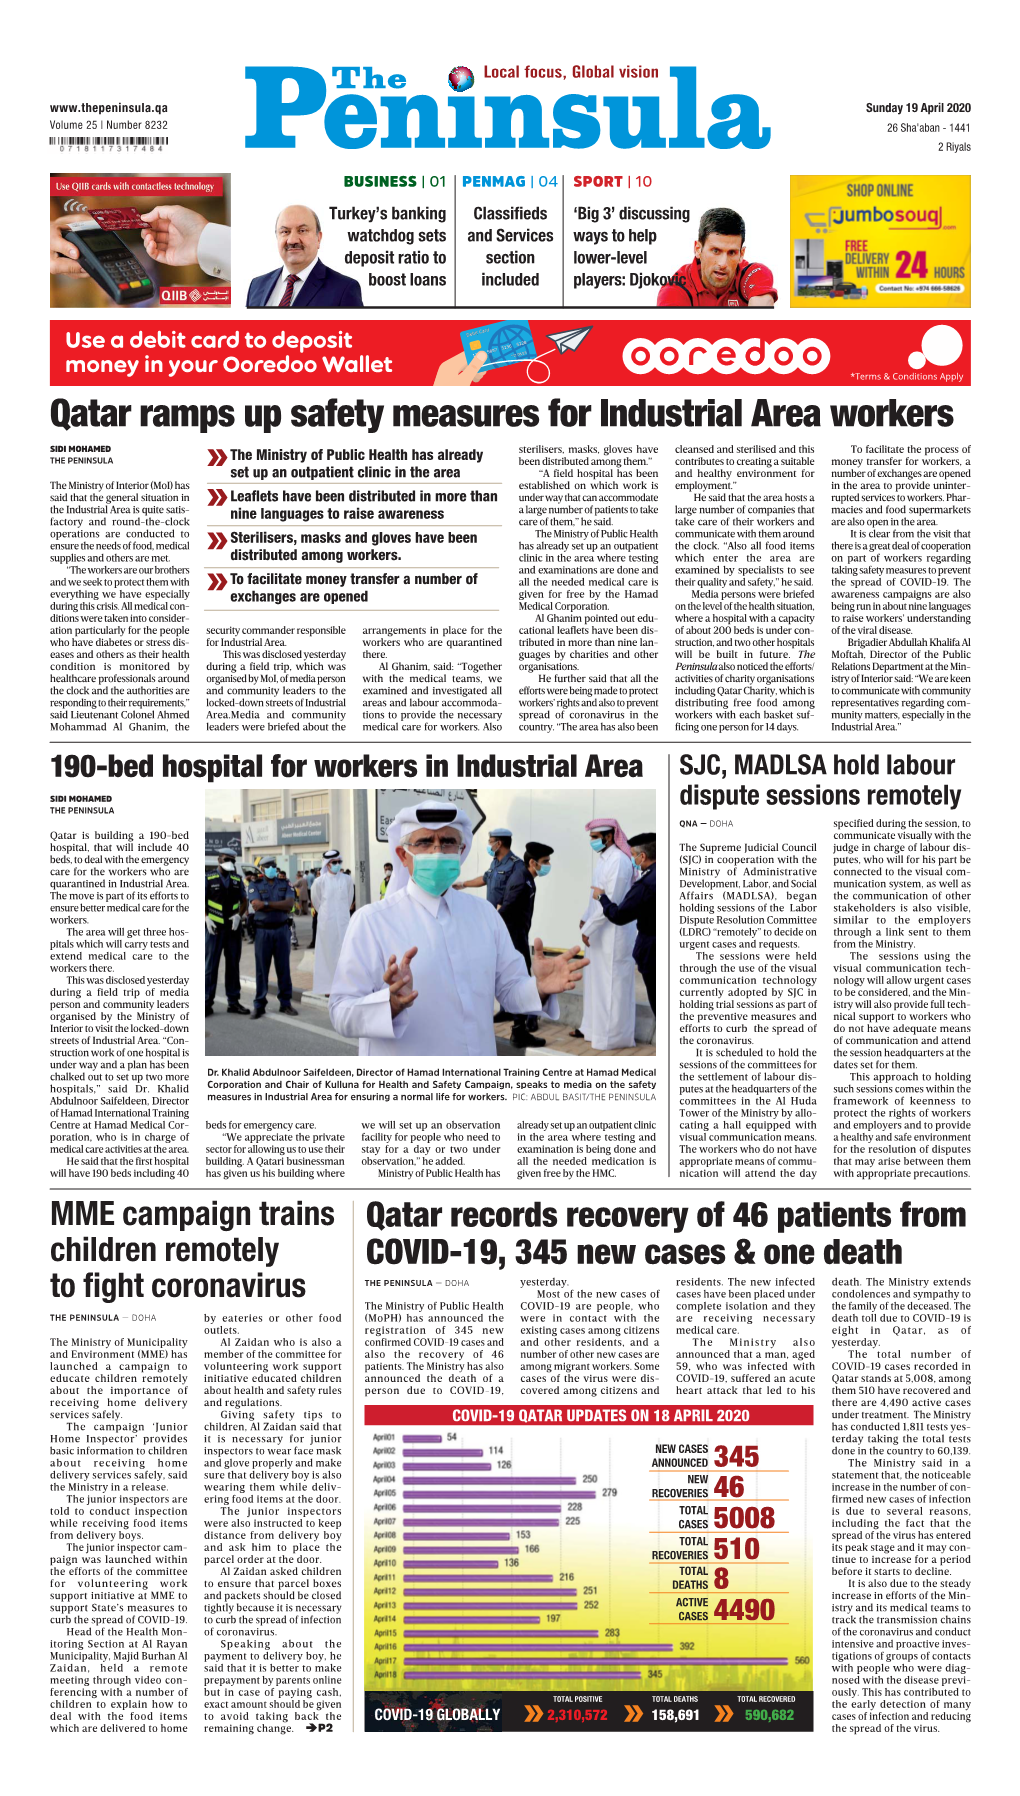 Qatar Ramps up Safety Measures for Industrial Area Workers